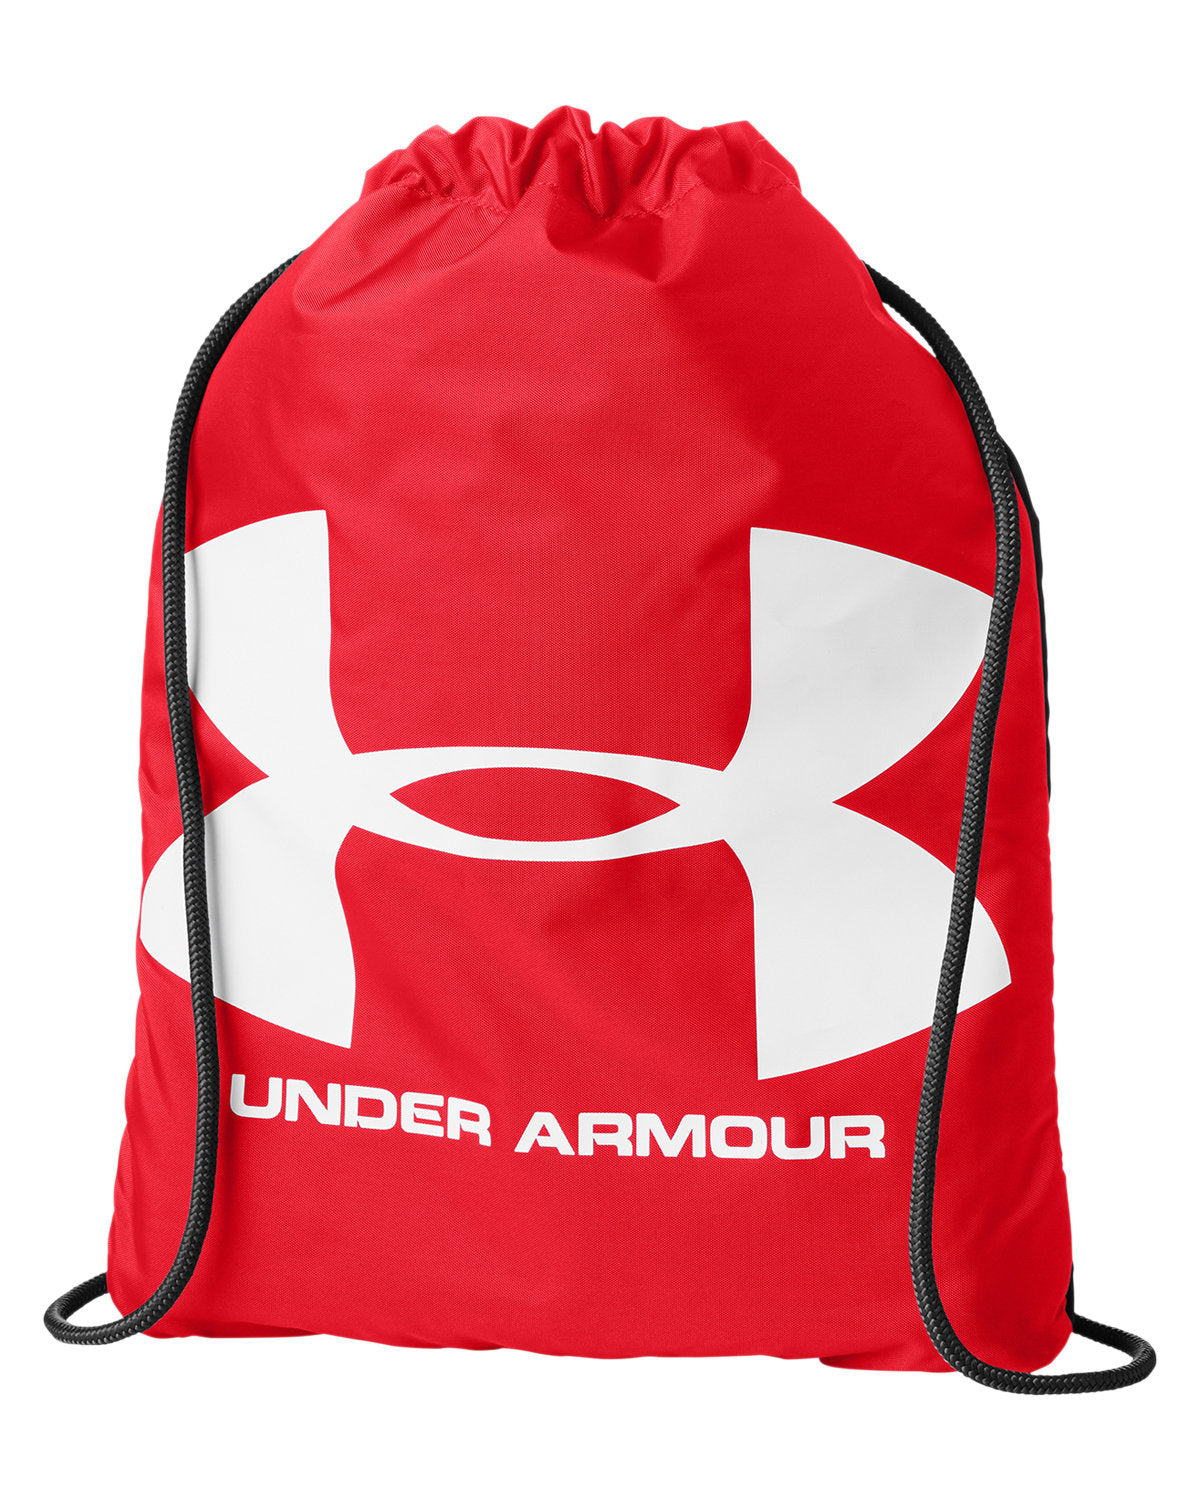 Under Armour Ozsee Branded Sackpacks, Red